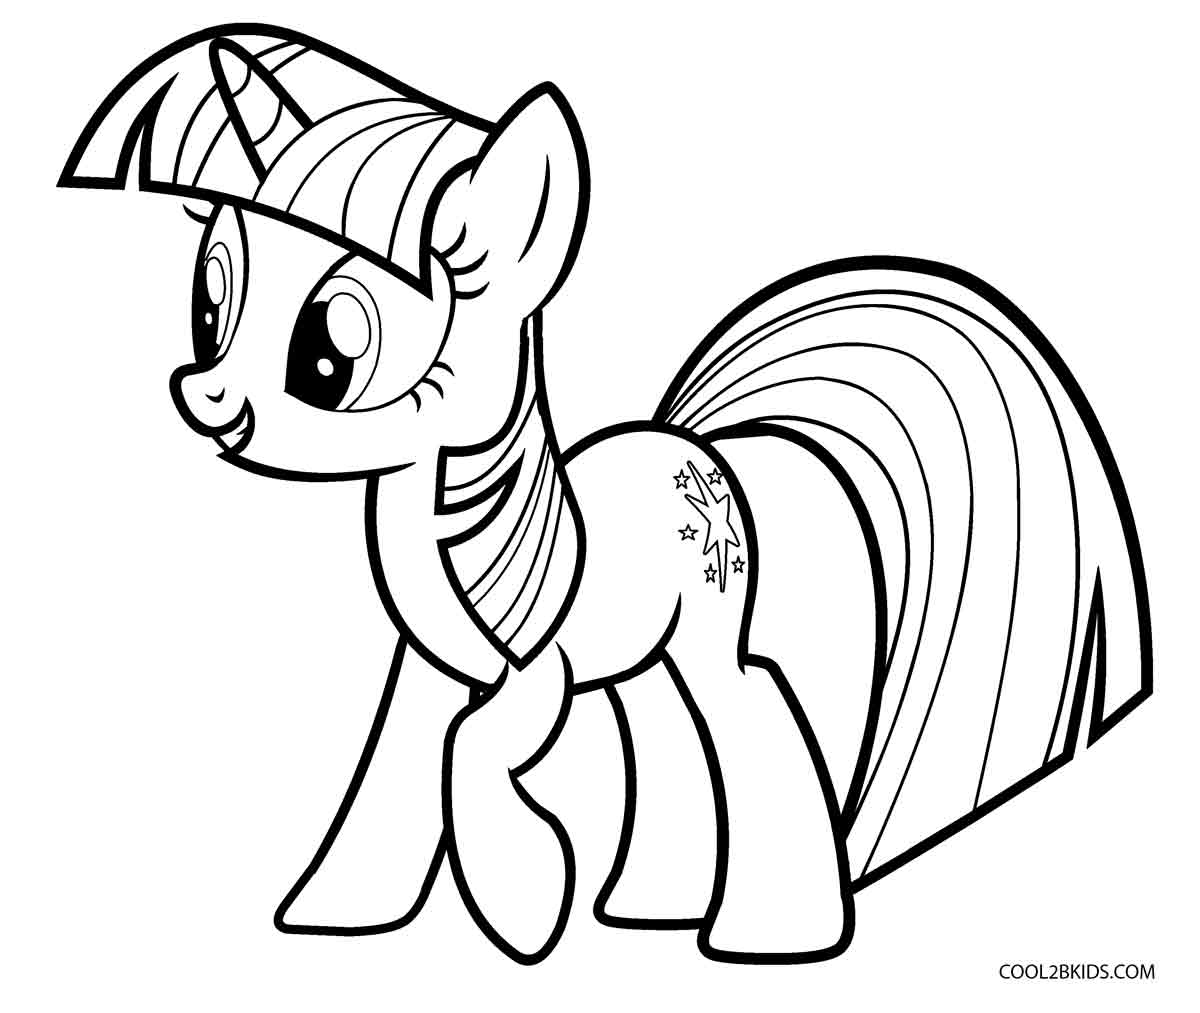 twilight sparkle coloring pages to print twilight sparkle mlp coloring pages printable to print pages coloring twilight sparkle 